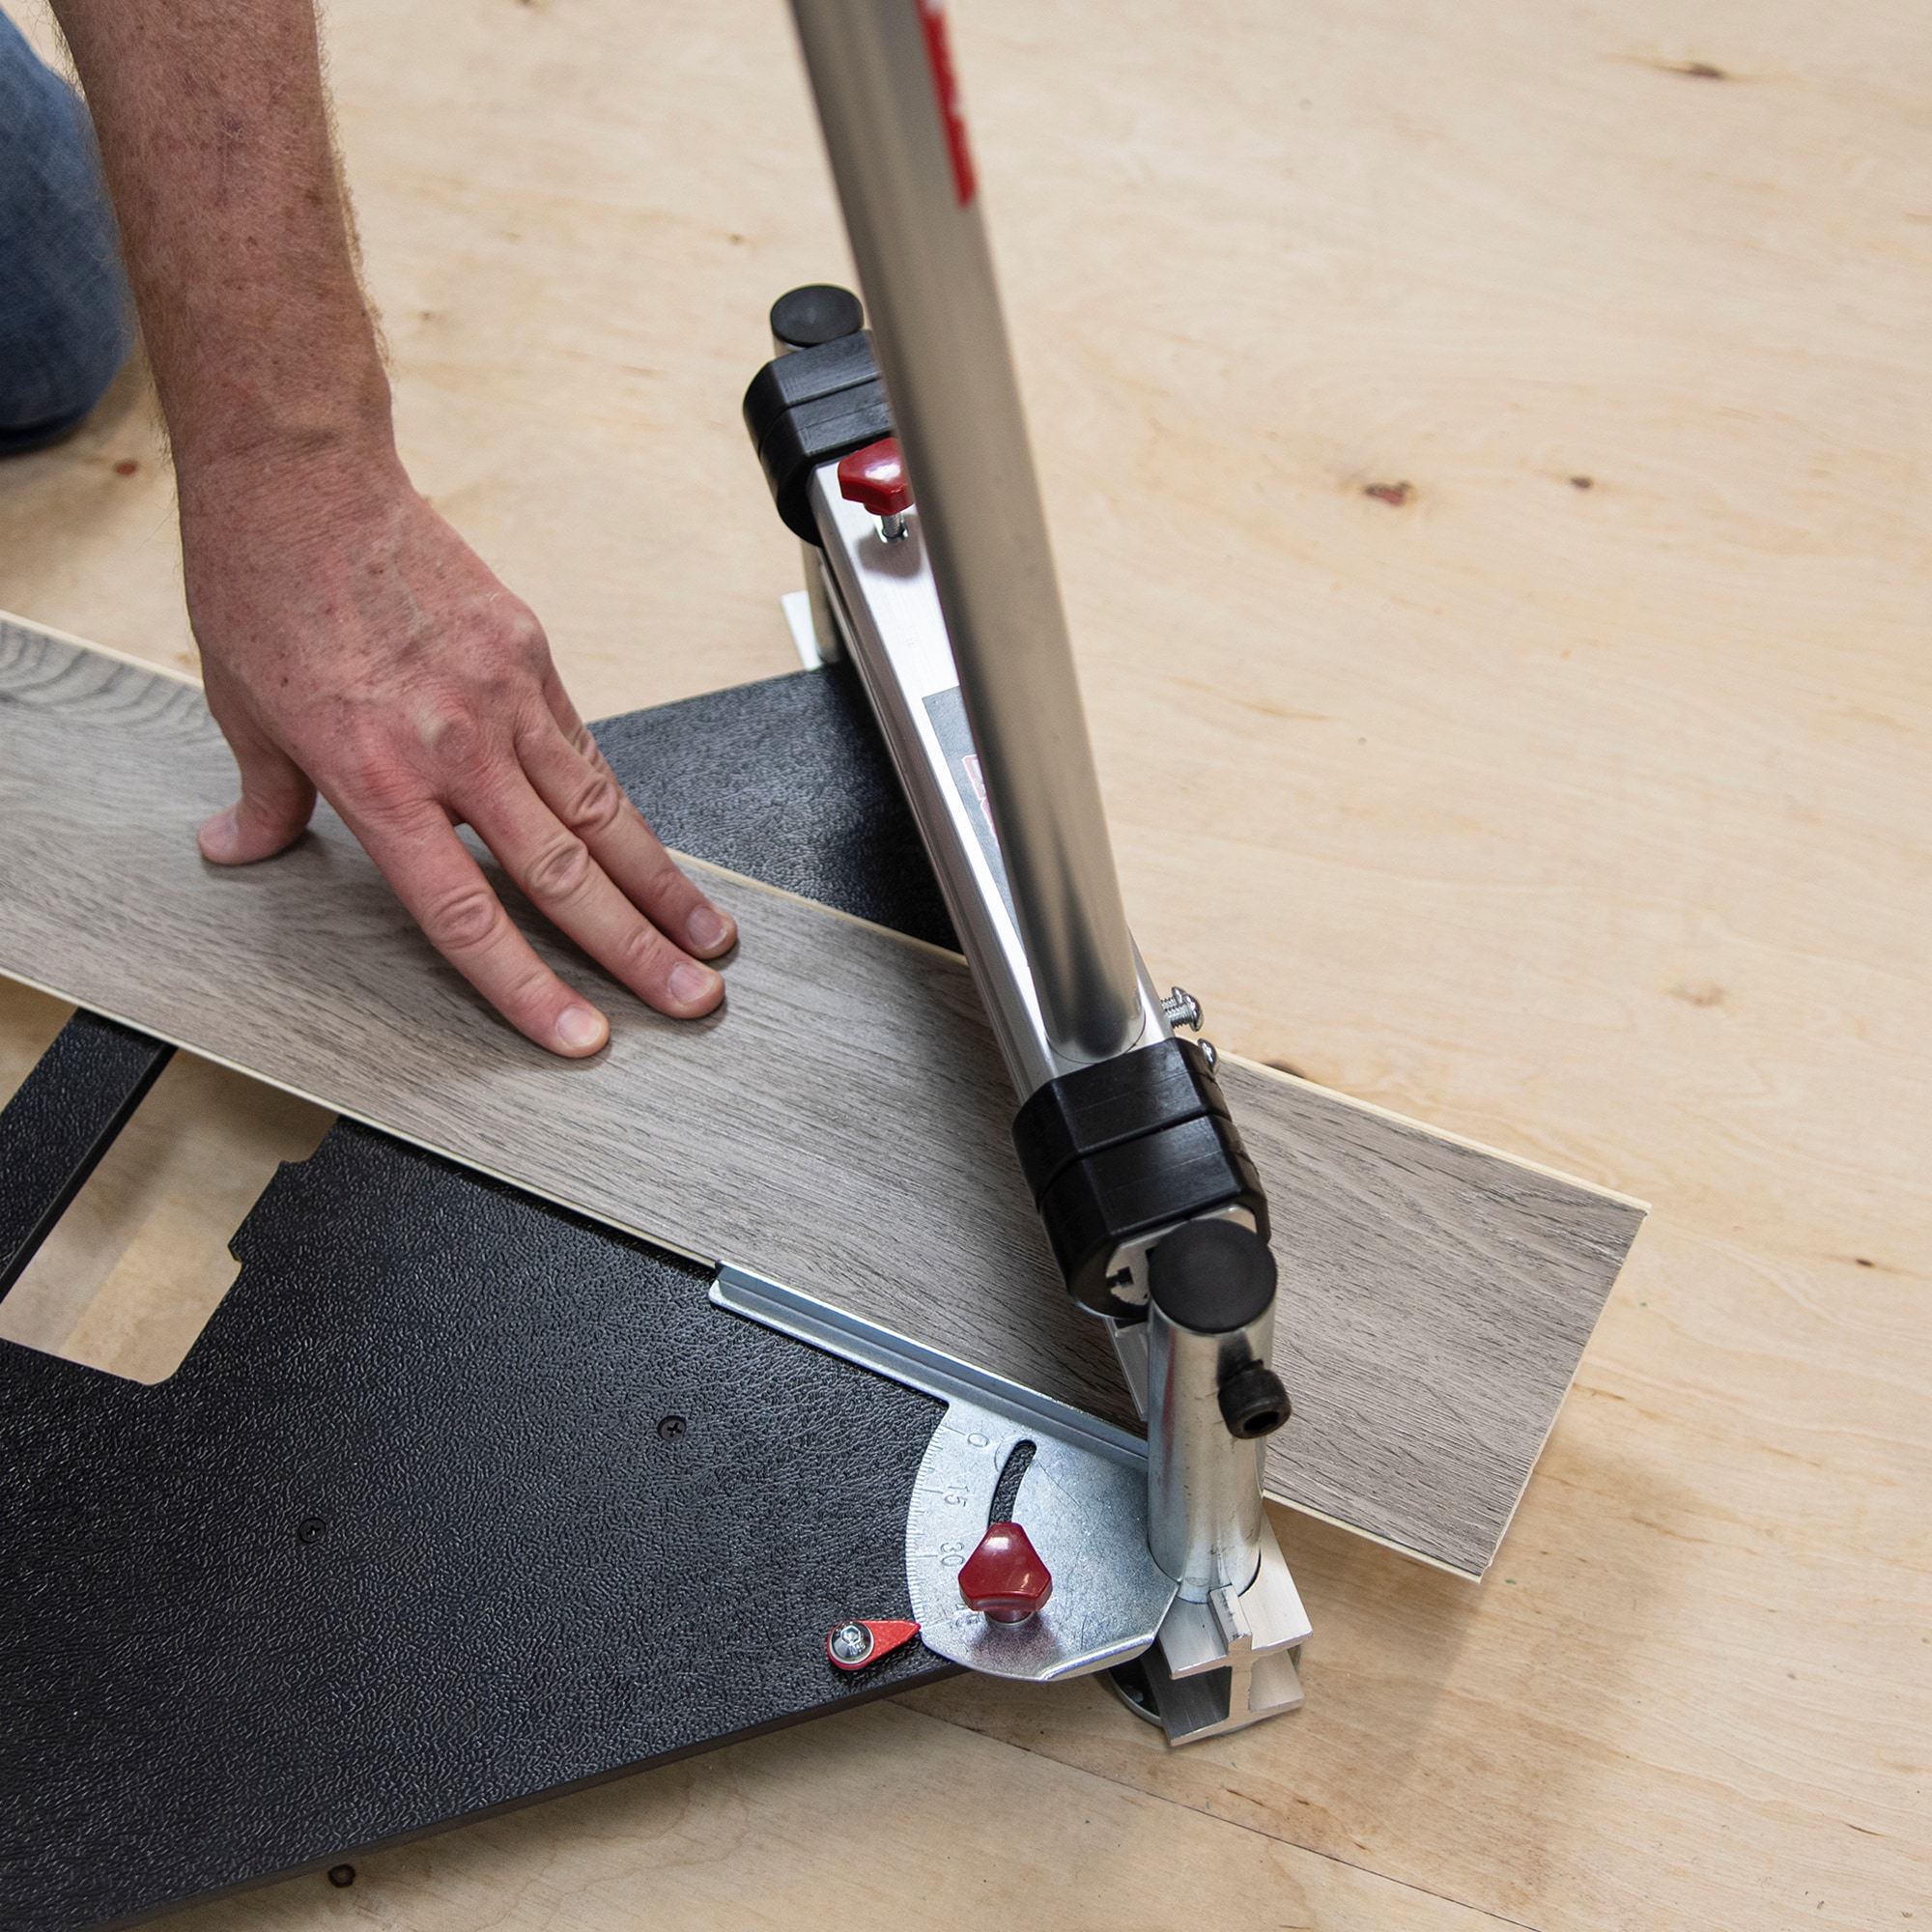 Wholesale vinyl flooring cutter Crafted To Perform Many Other Tasks 